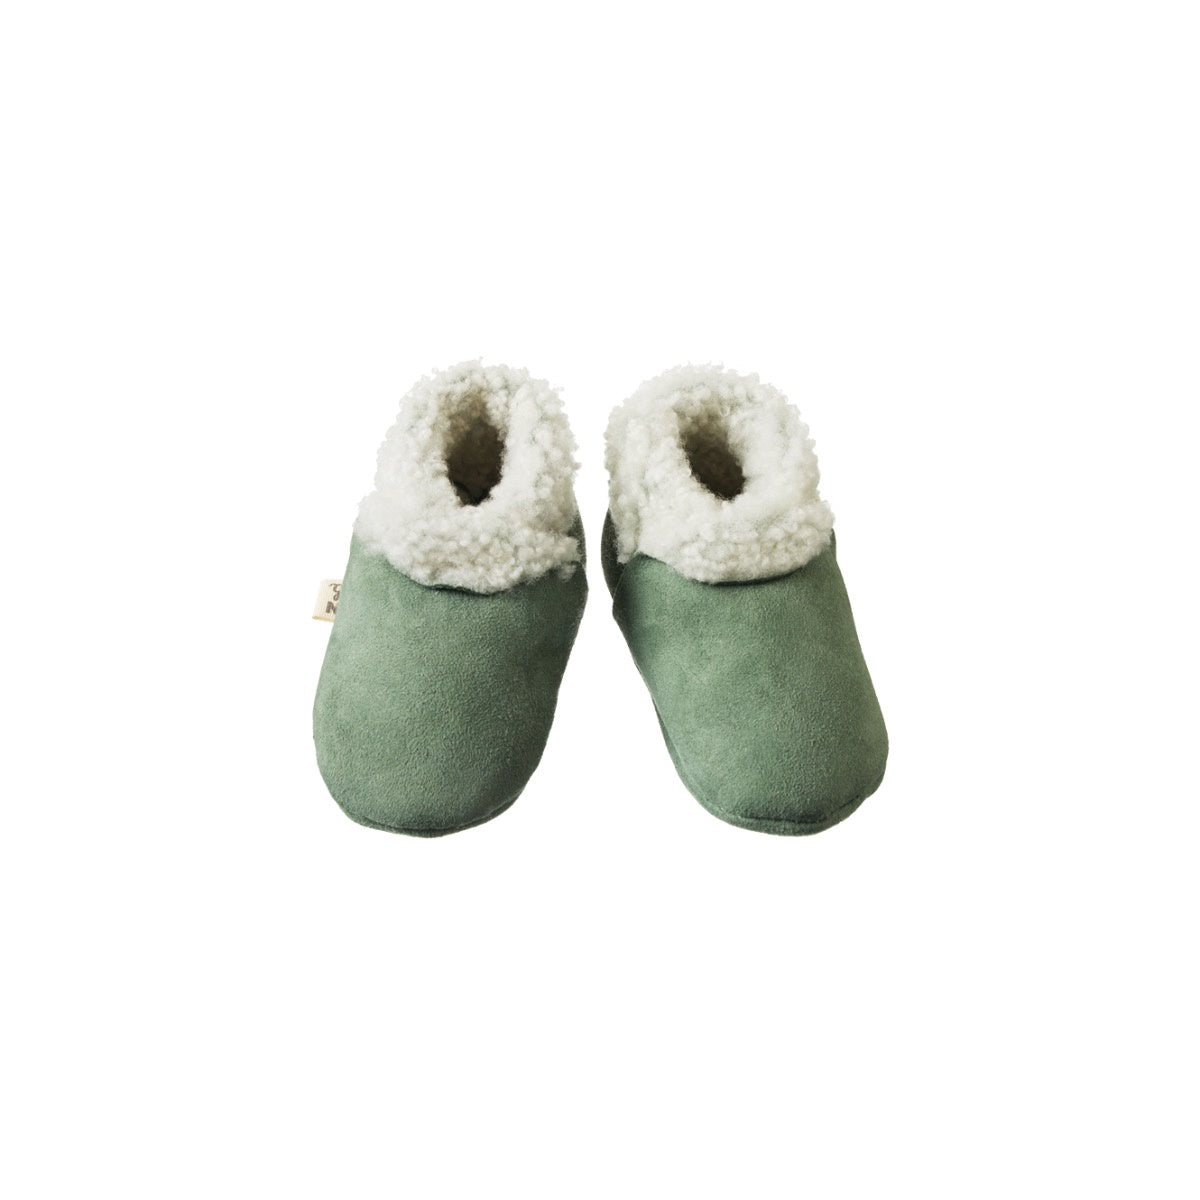 Lambskin Booties / Lily Pad